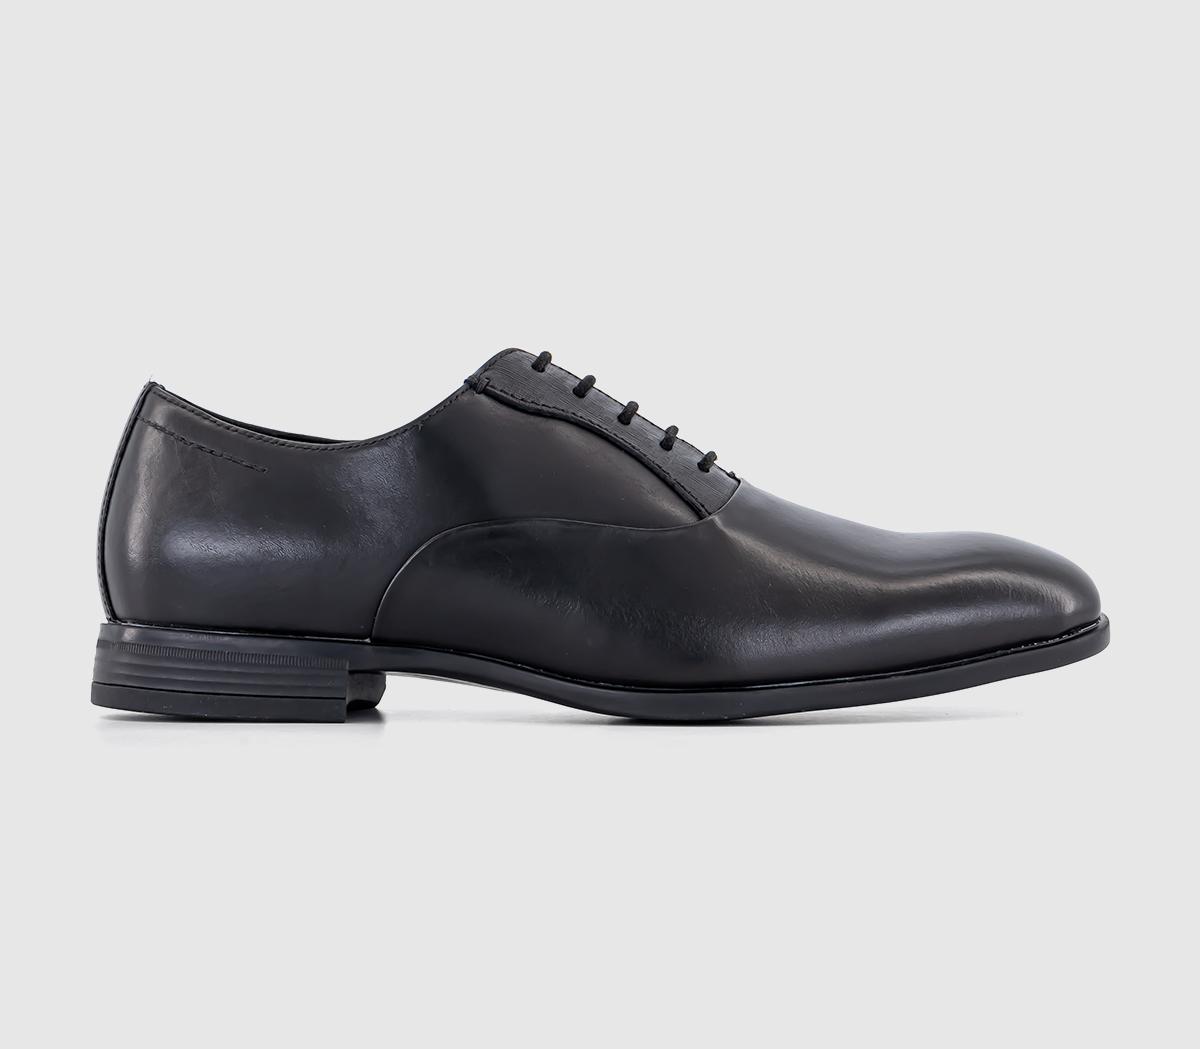 OFFICEMoreton Embossed Detail Oxford ShoesBlack Leather